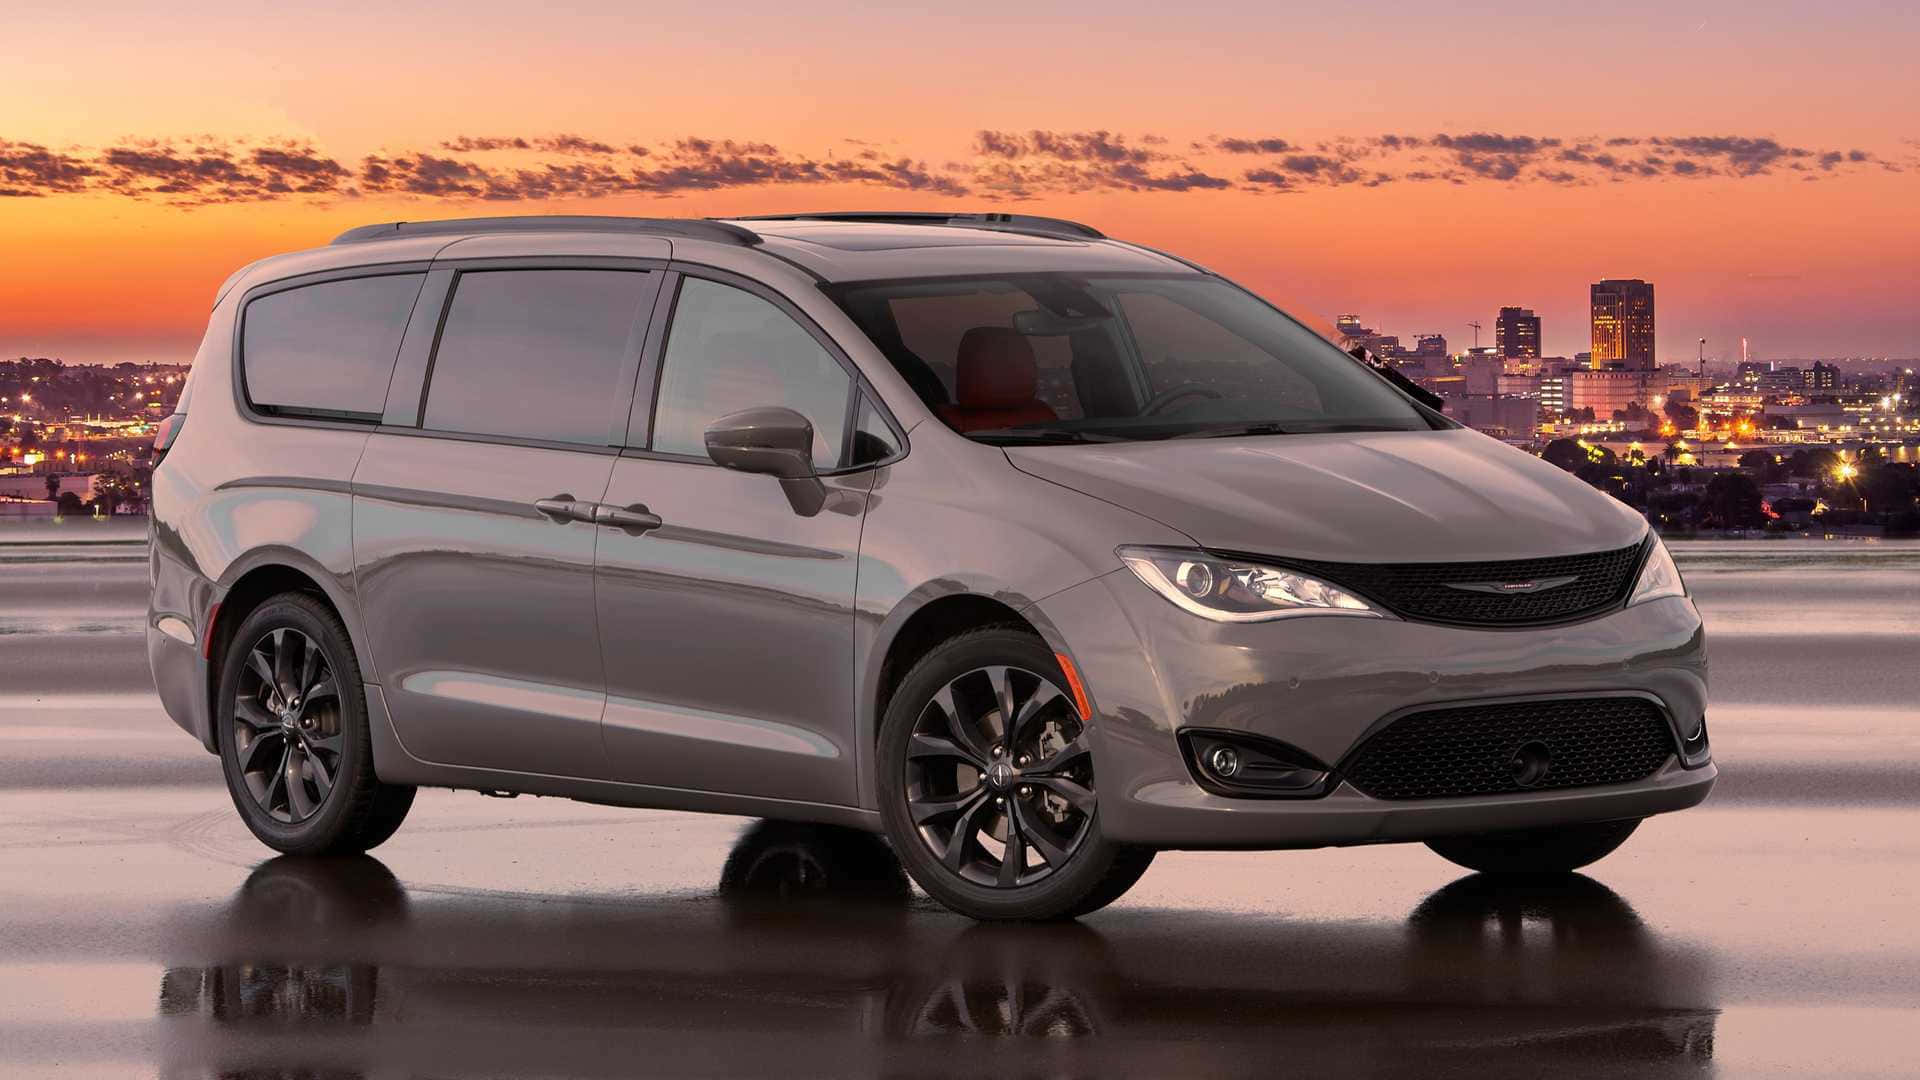 Family Road Trip in a Chrysler Pacifica Wallpaper